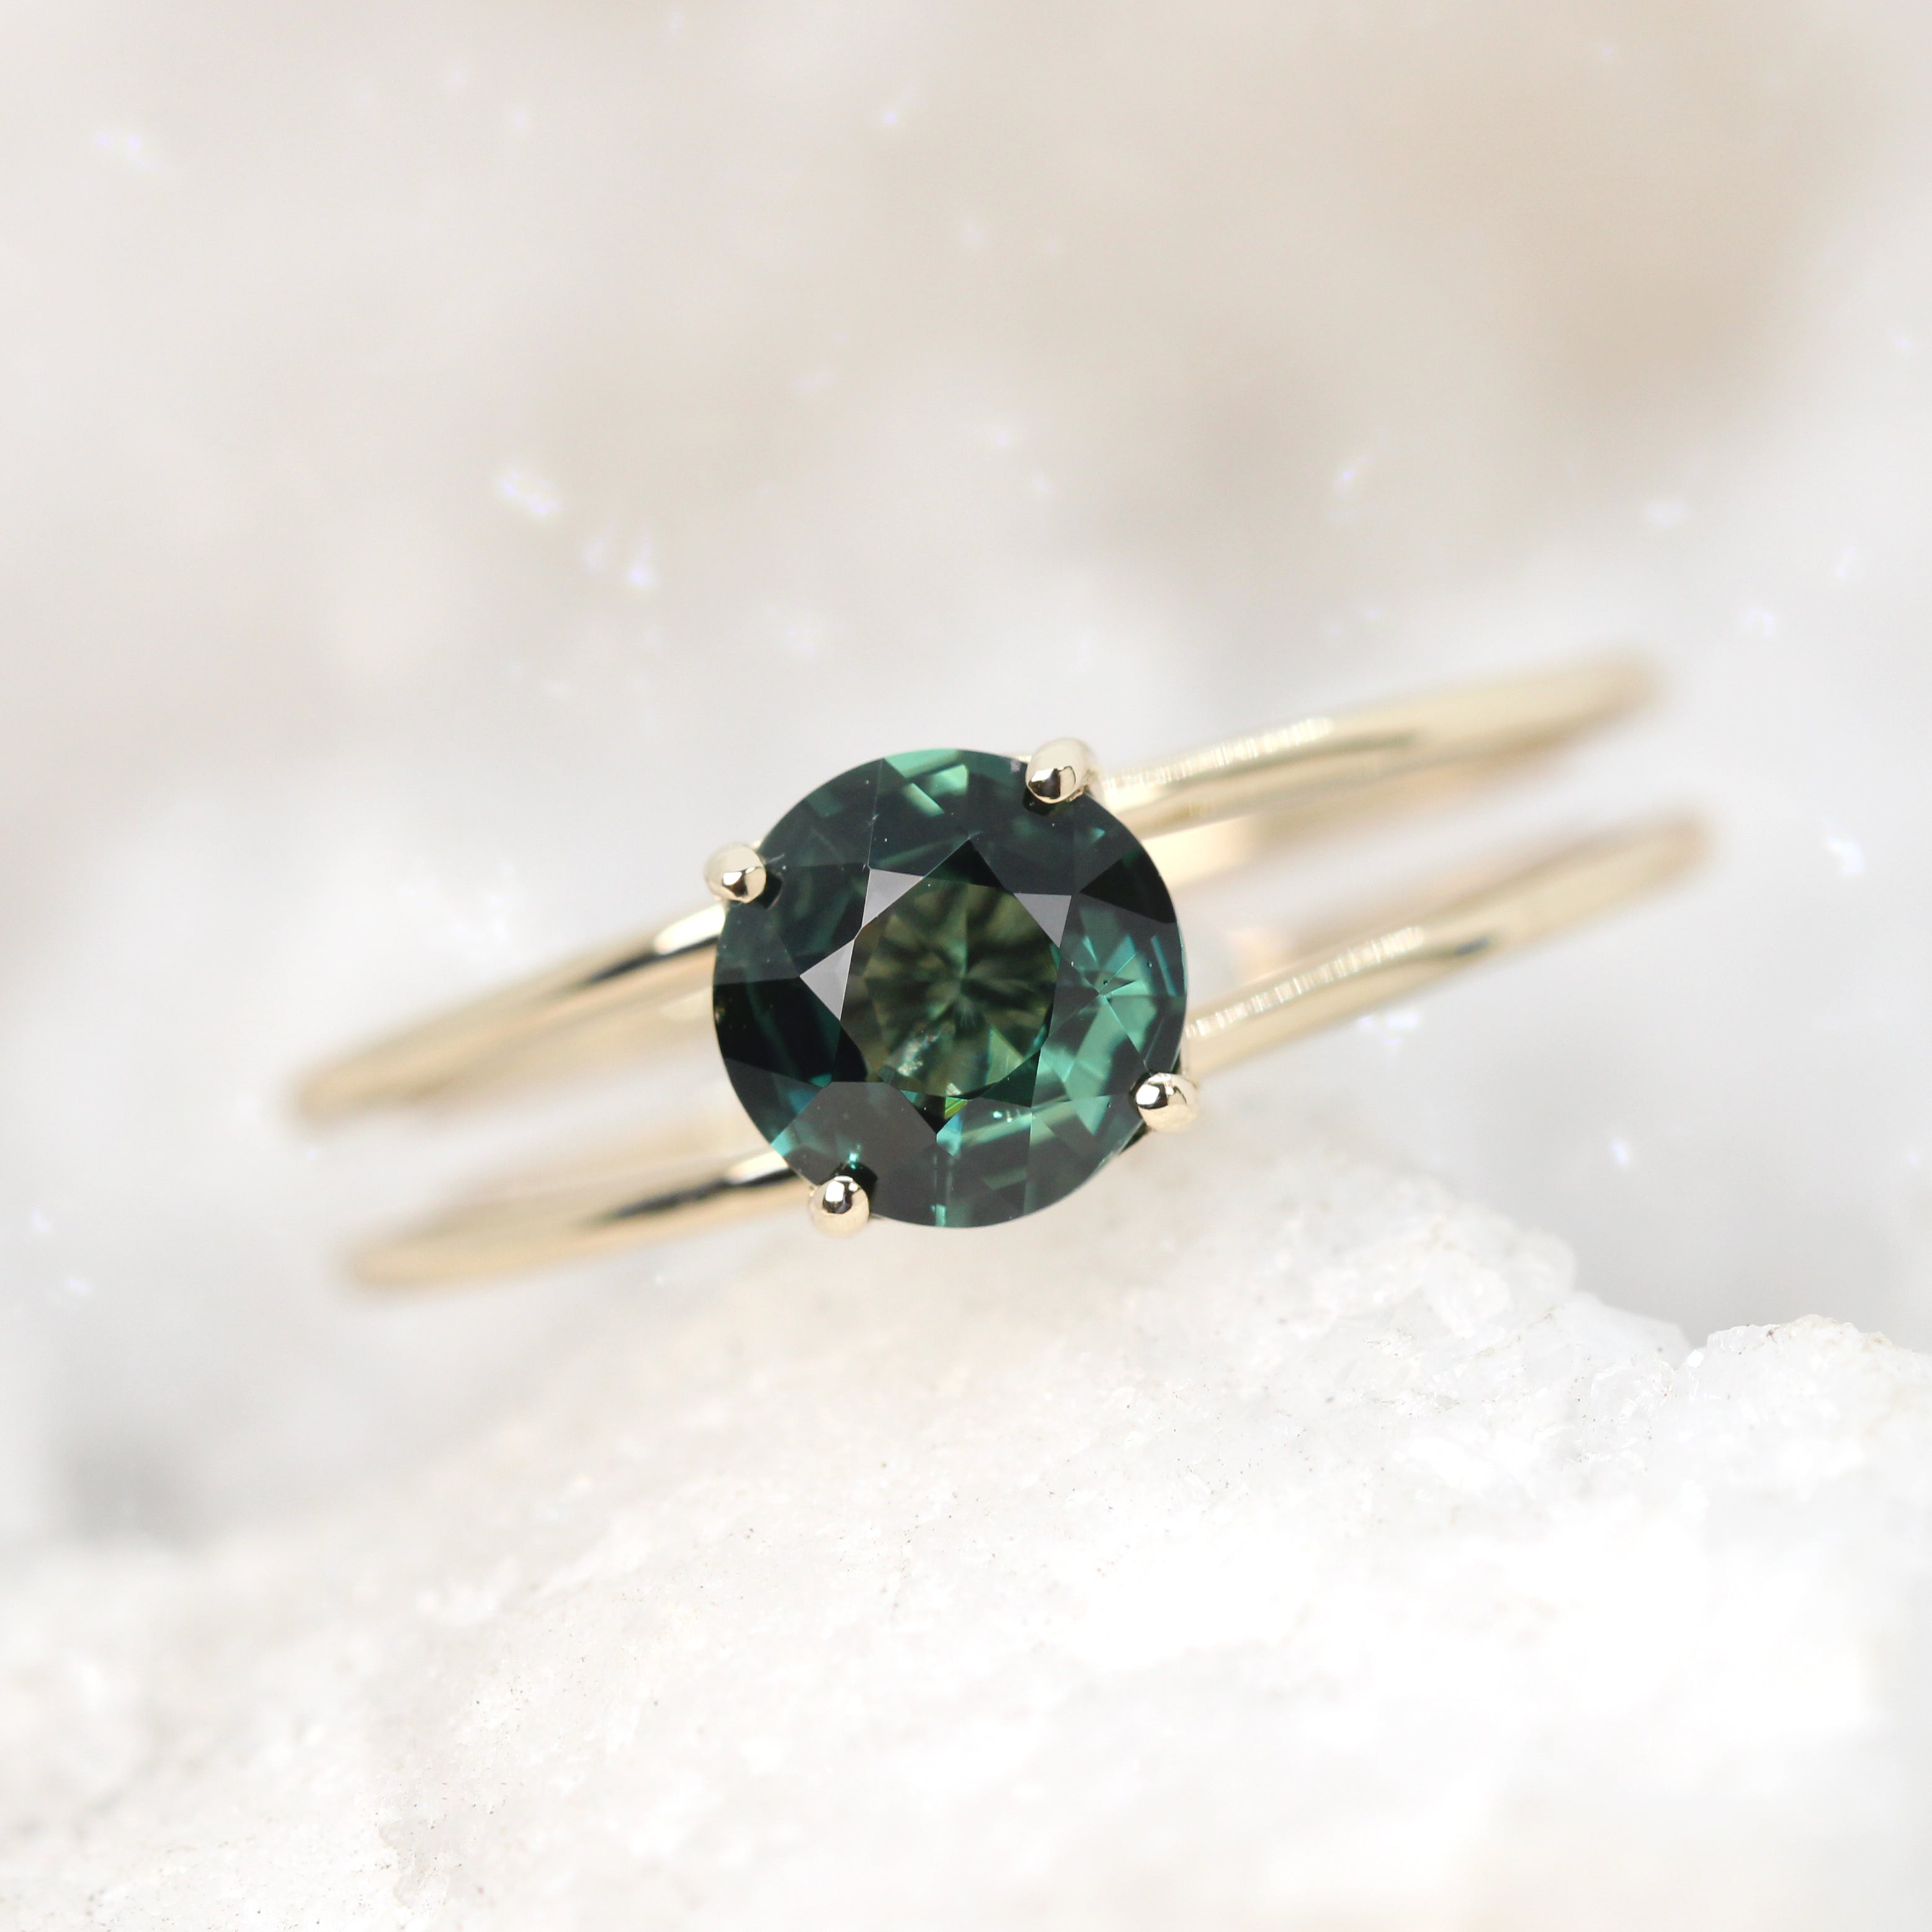 Apryl Ring with a 1.15 Carat Round Dark Teal Sapphire in 14k Yellow Gold - Ready to Size and Ship - Midwinter Co. Alternative Bridal Rings and Modern Fine Jewelry